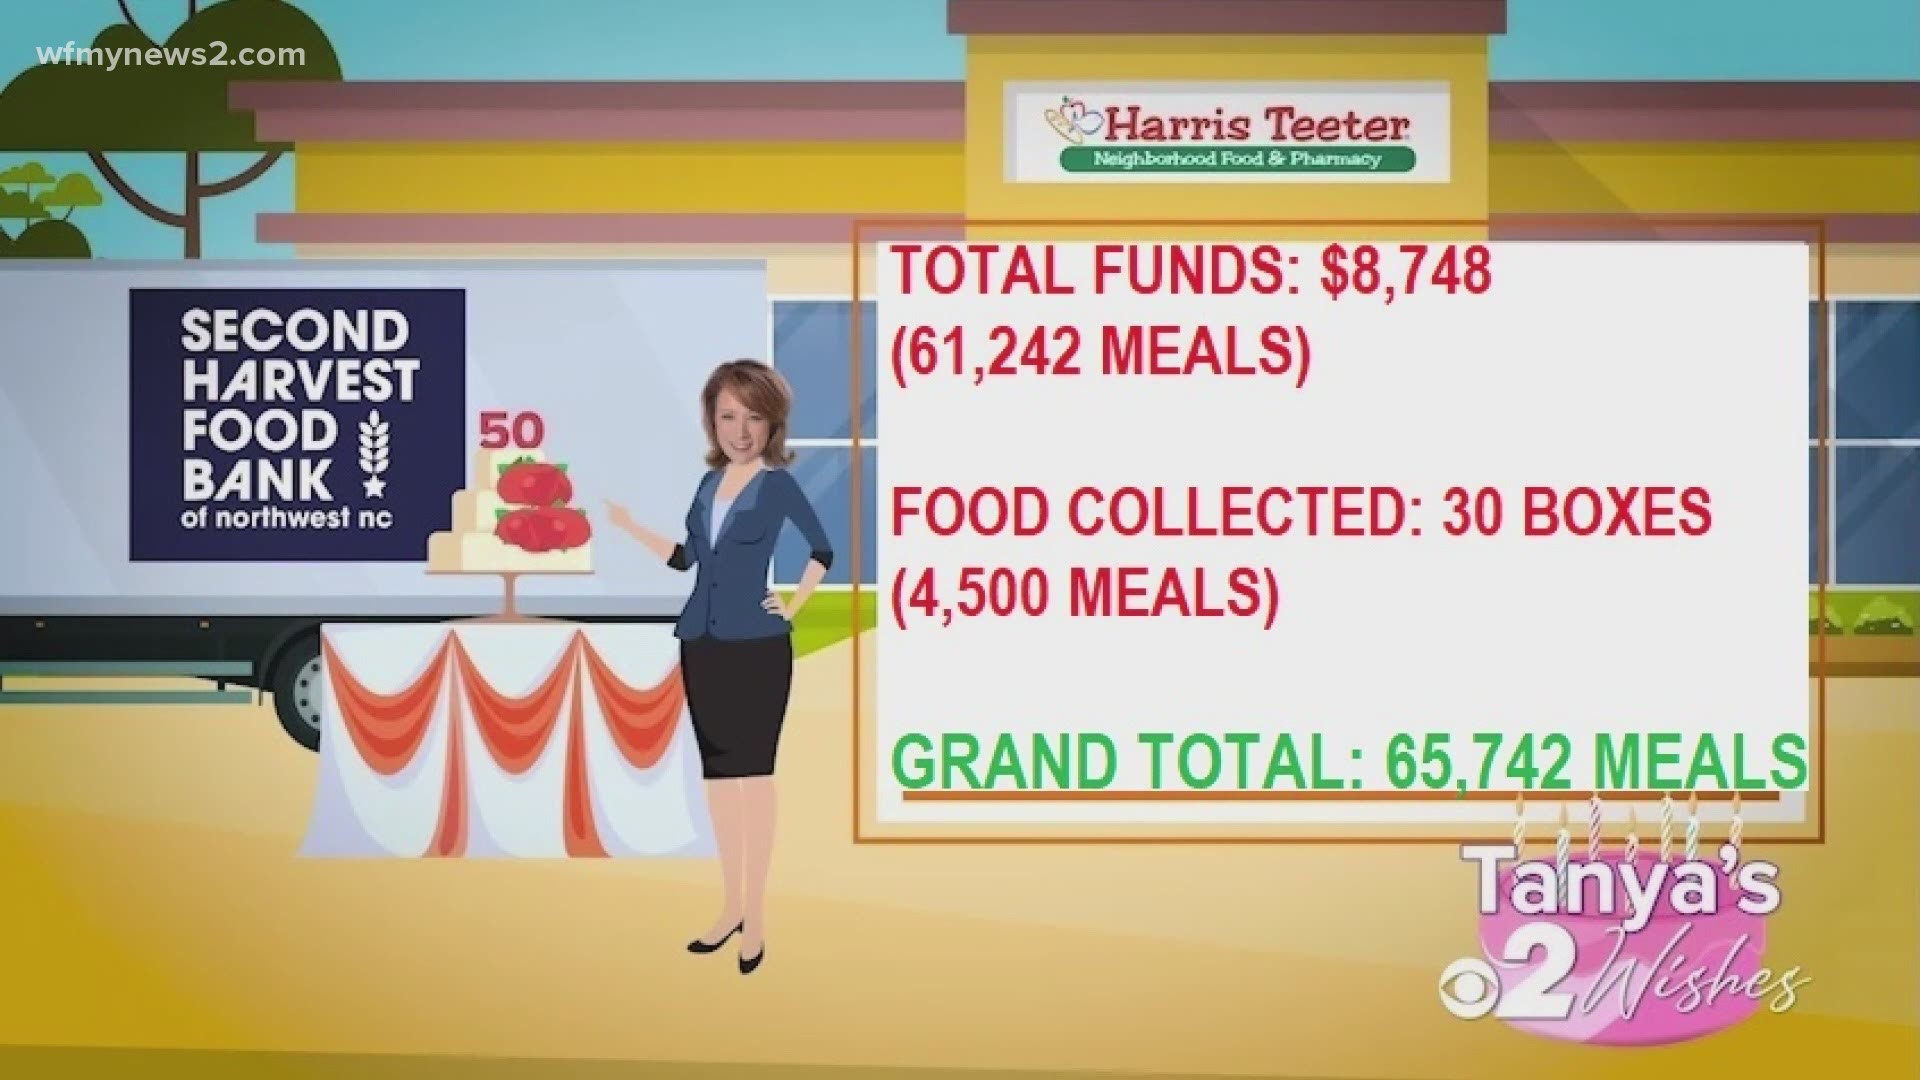 In the end, people donated more than 61,000 meals to Second Harvest Food Bank.